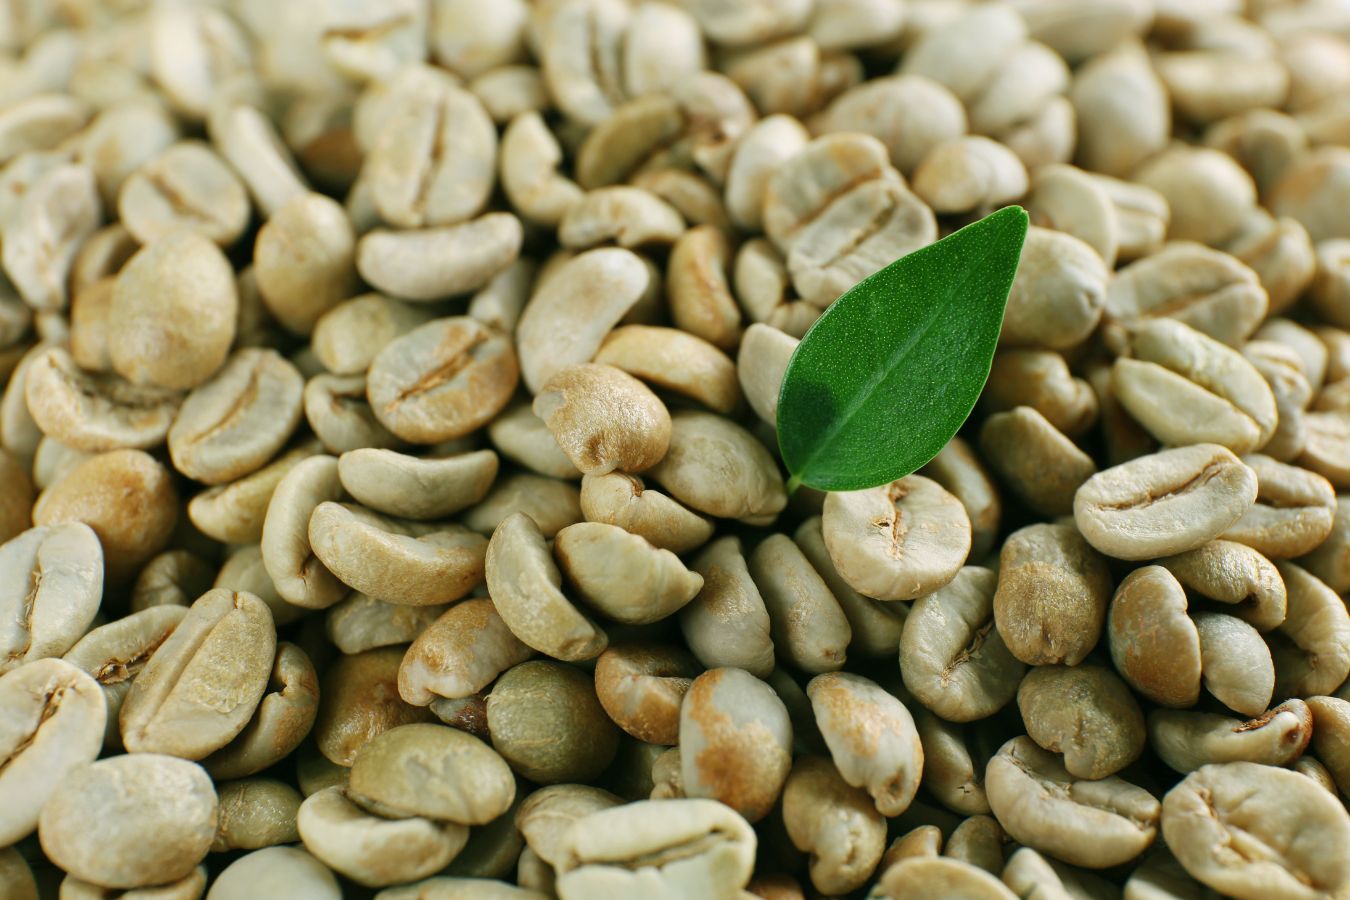 How Long Can You Store Green Coffee Beans?